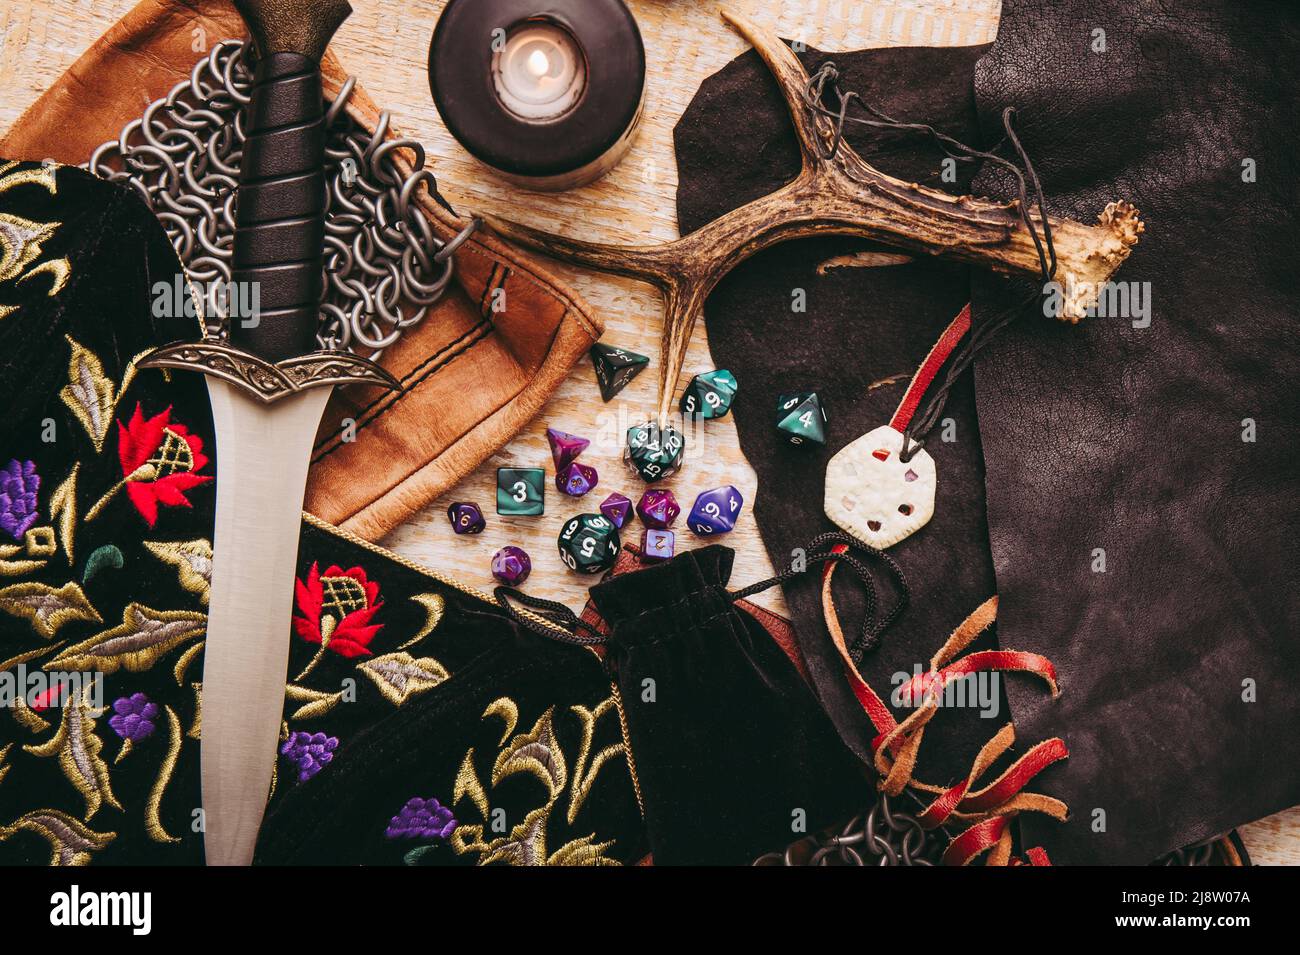 Fantasy role play board game still life concept. Background decorated with various character objects tools. Dagger, chain mail, amulet, clothing, dice Stock Photo